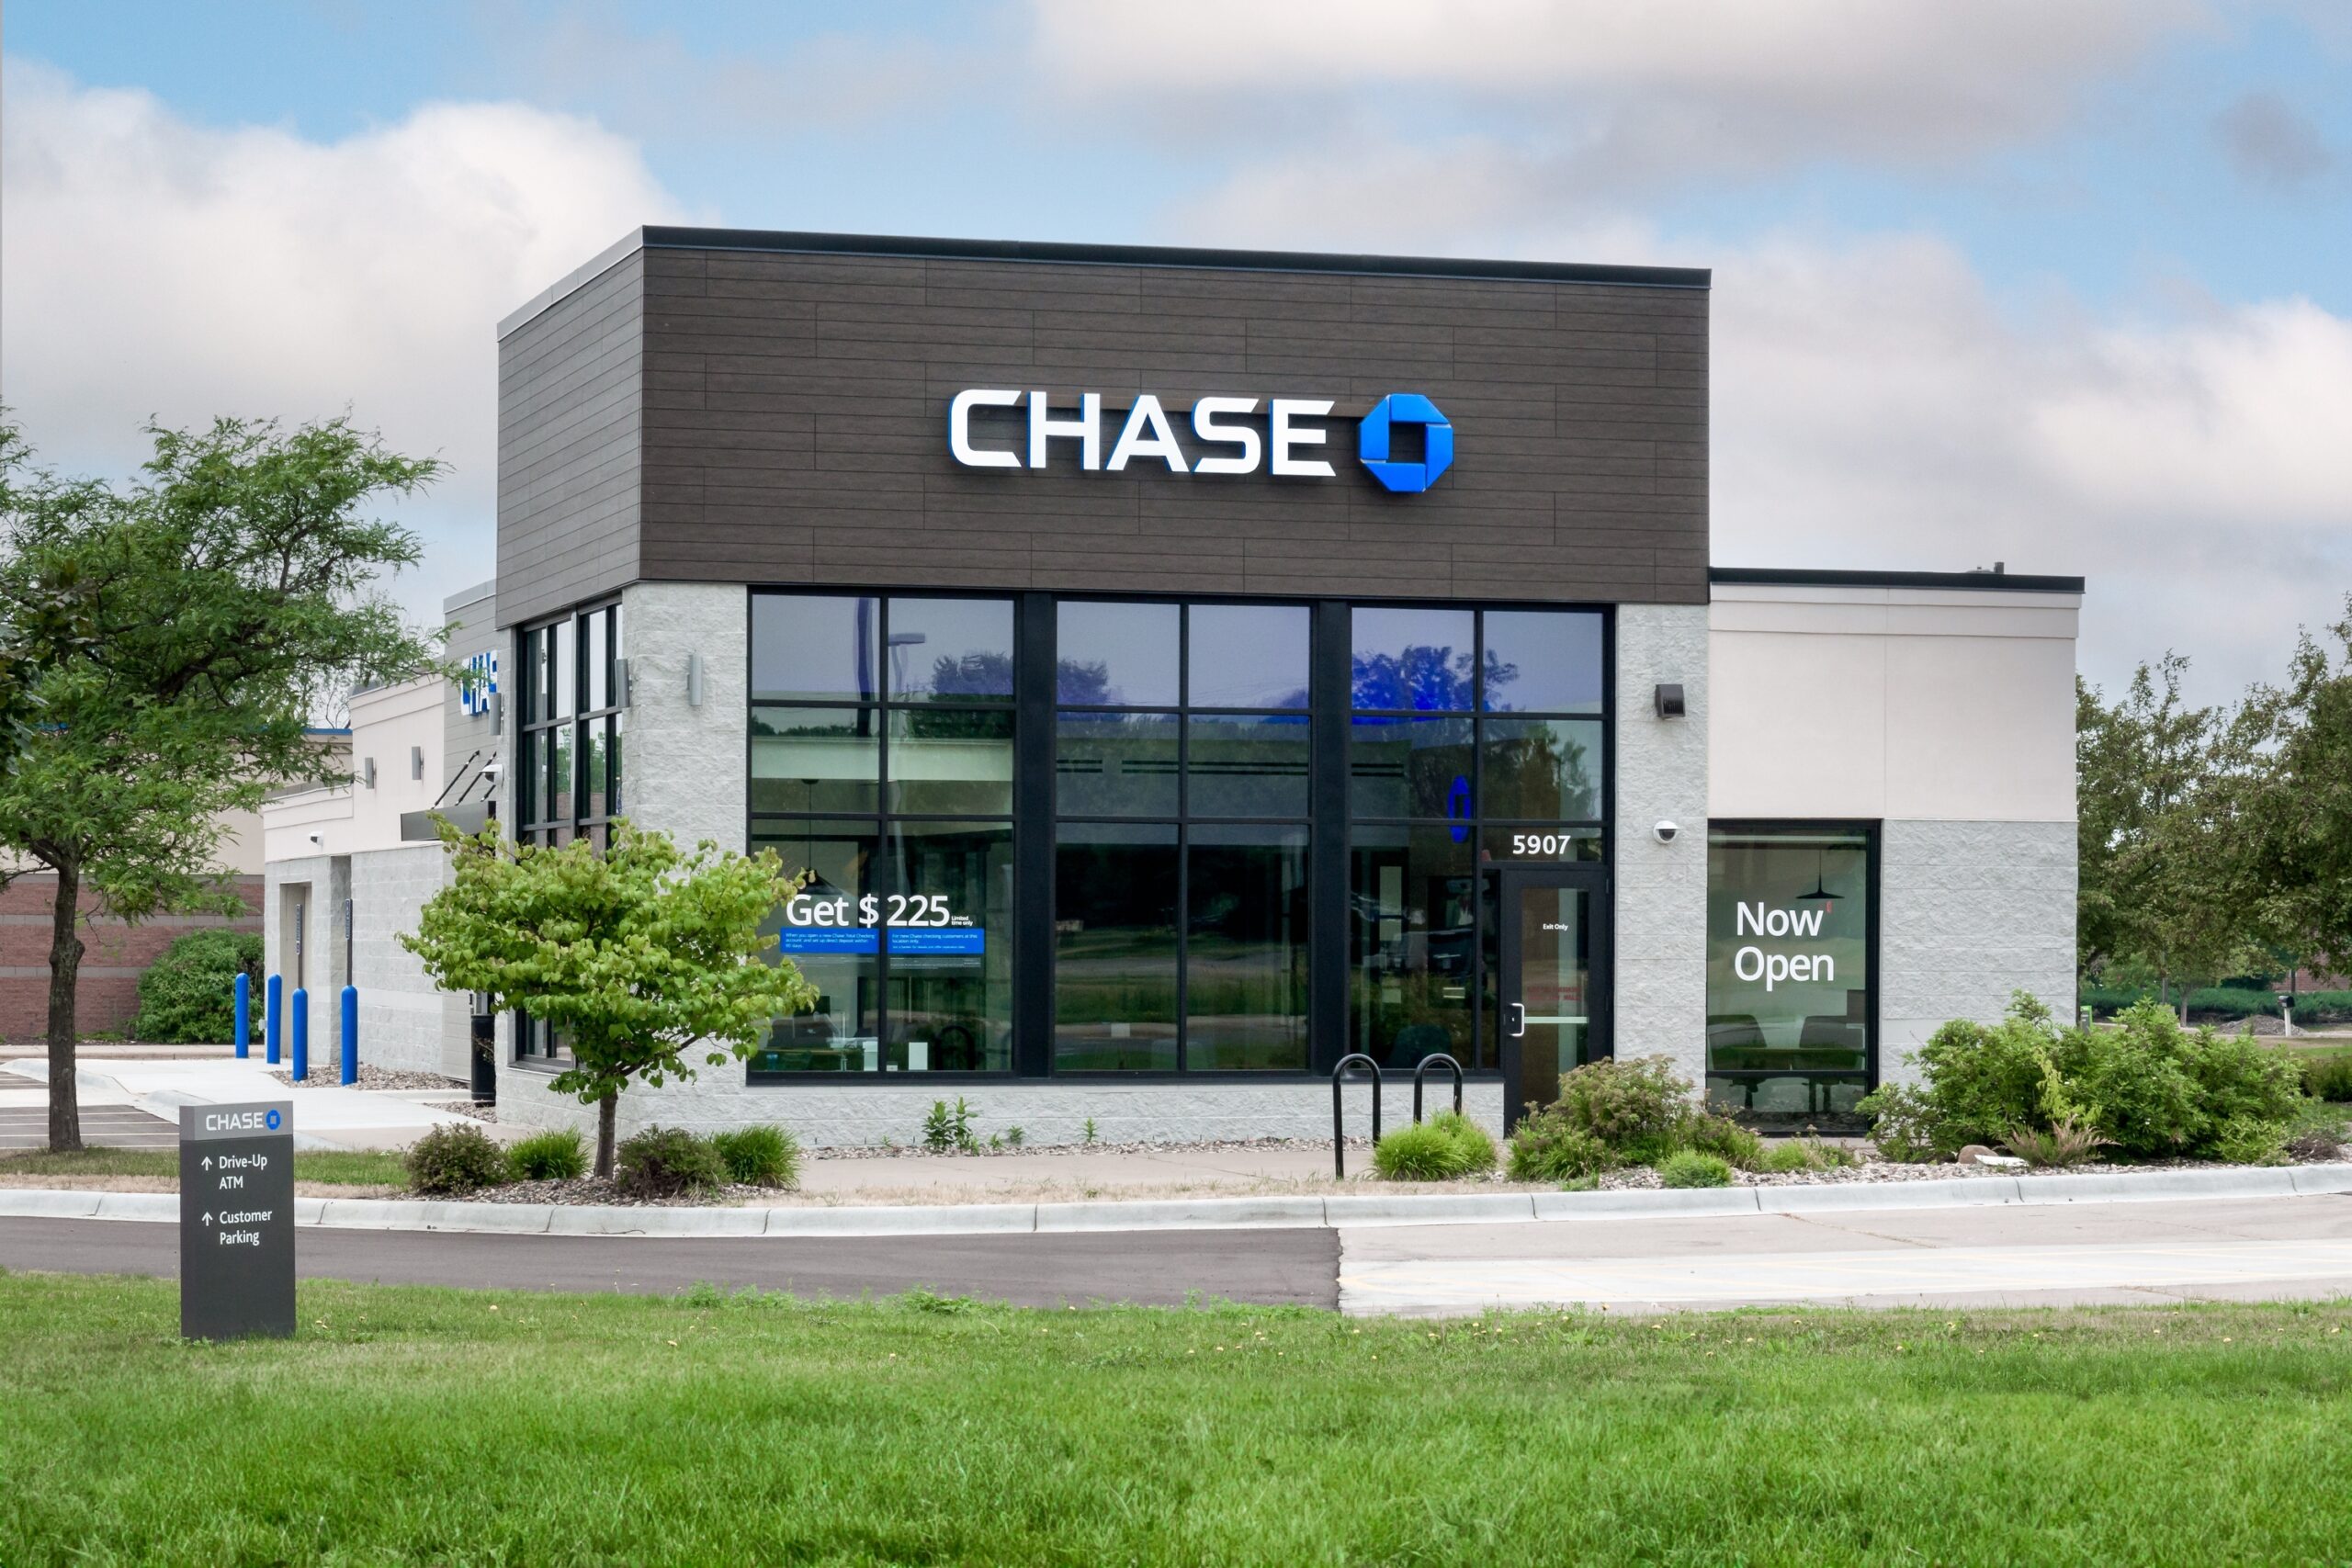 chase-will-close-23-branches-in-the-united-states-in-the-coming-weeks:-locations-and-reasons